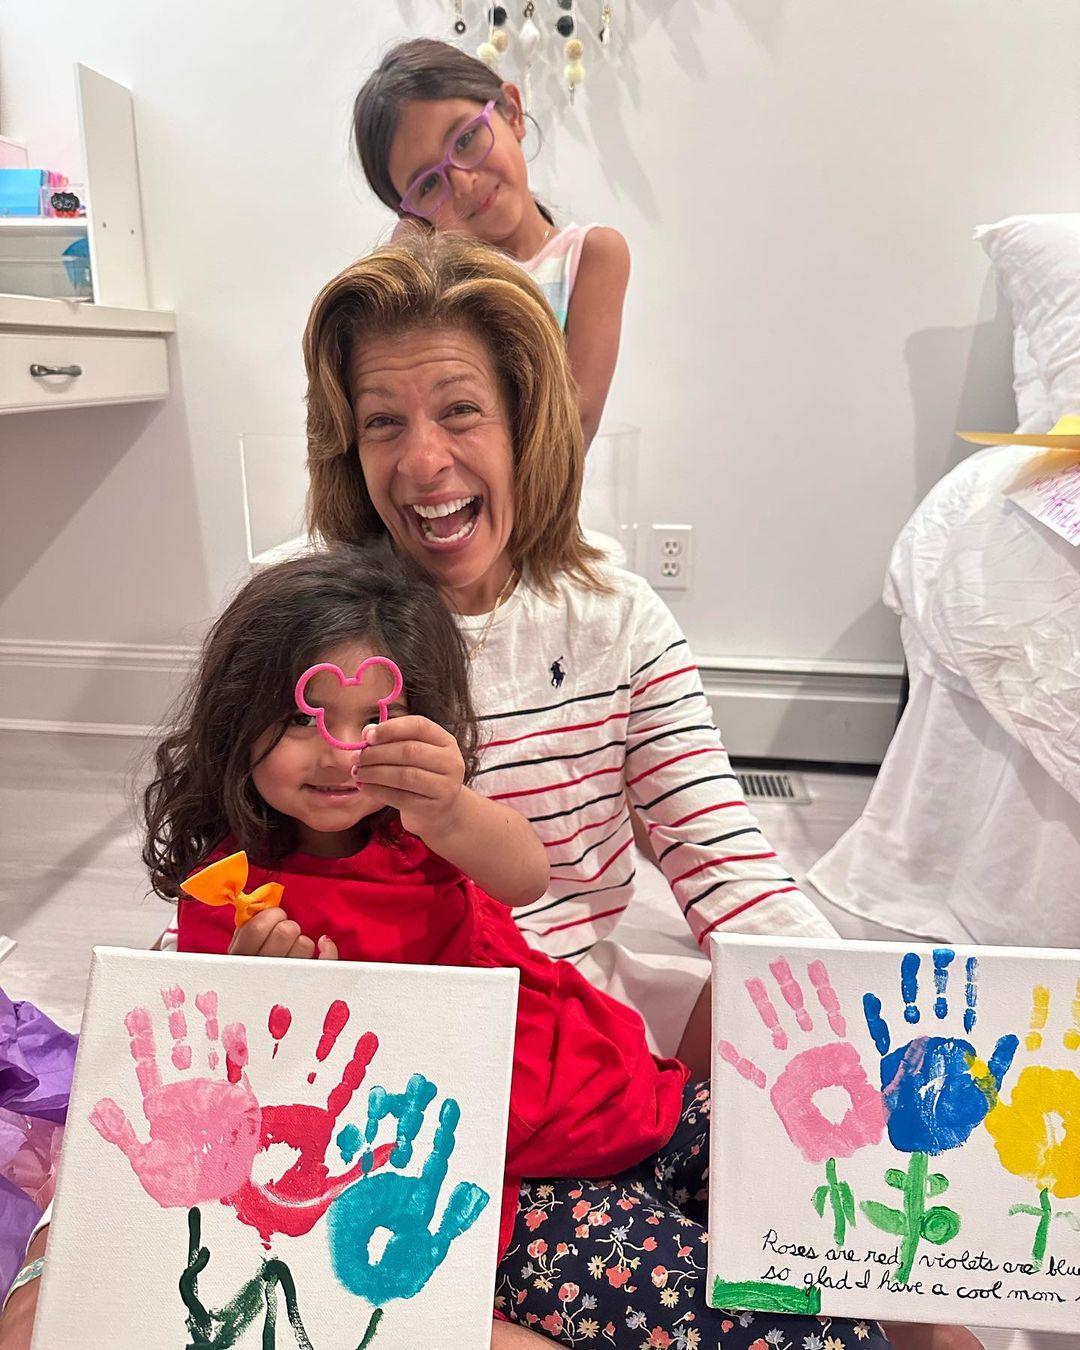 Hoda Kotb Shares Update About Daughter's Recovery After Health Scare